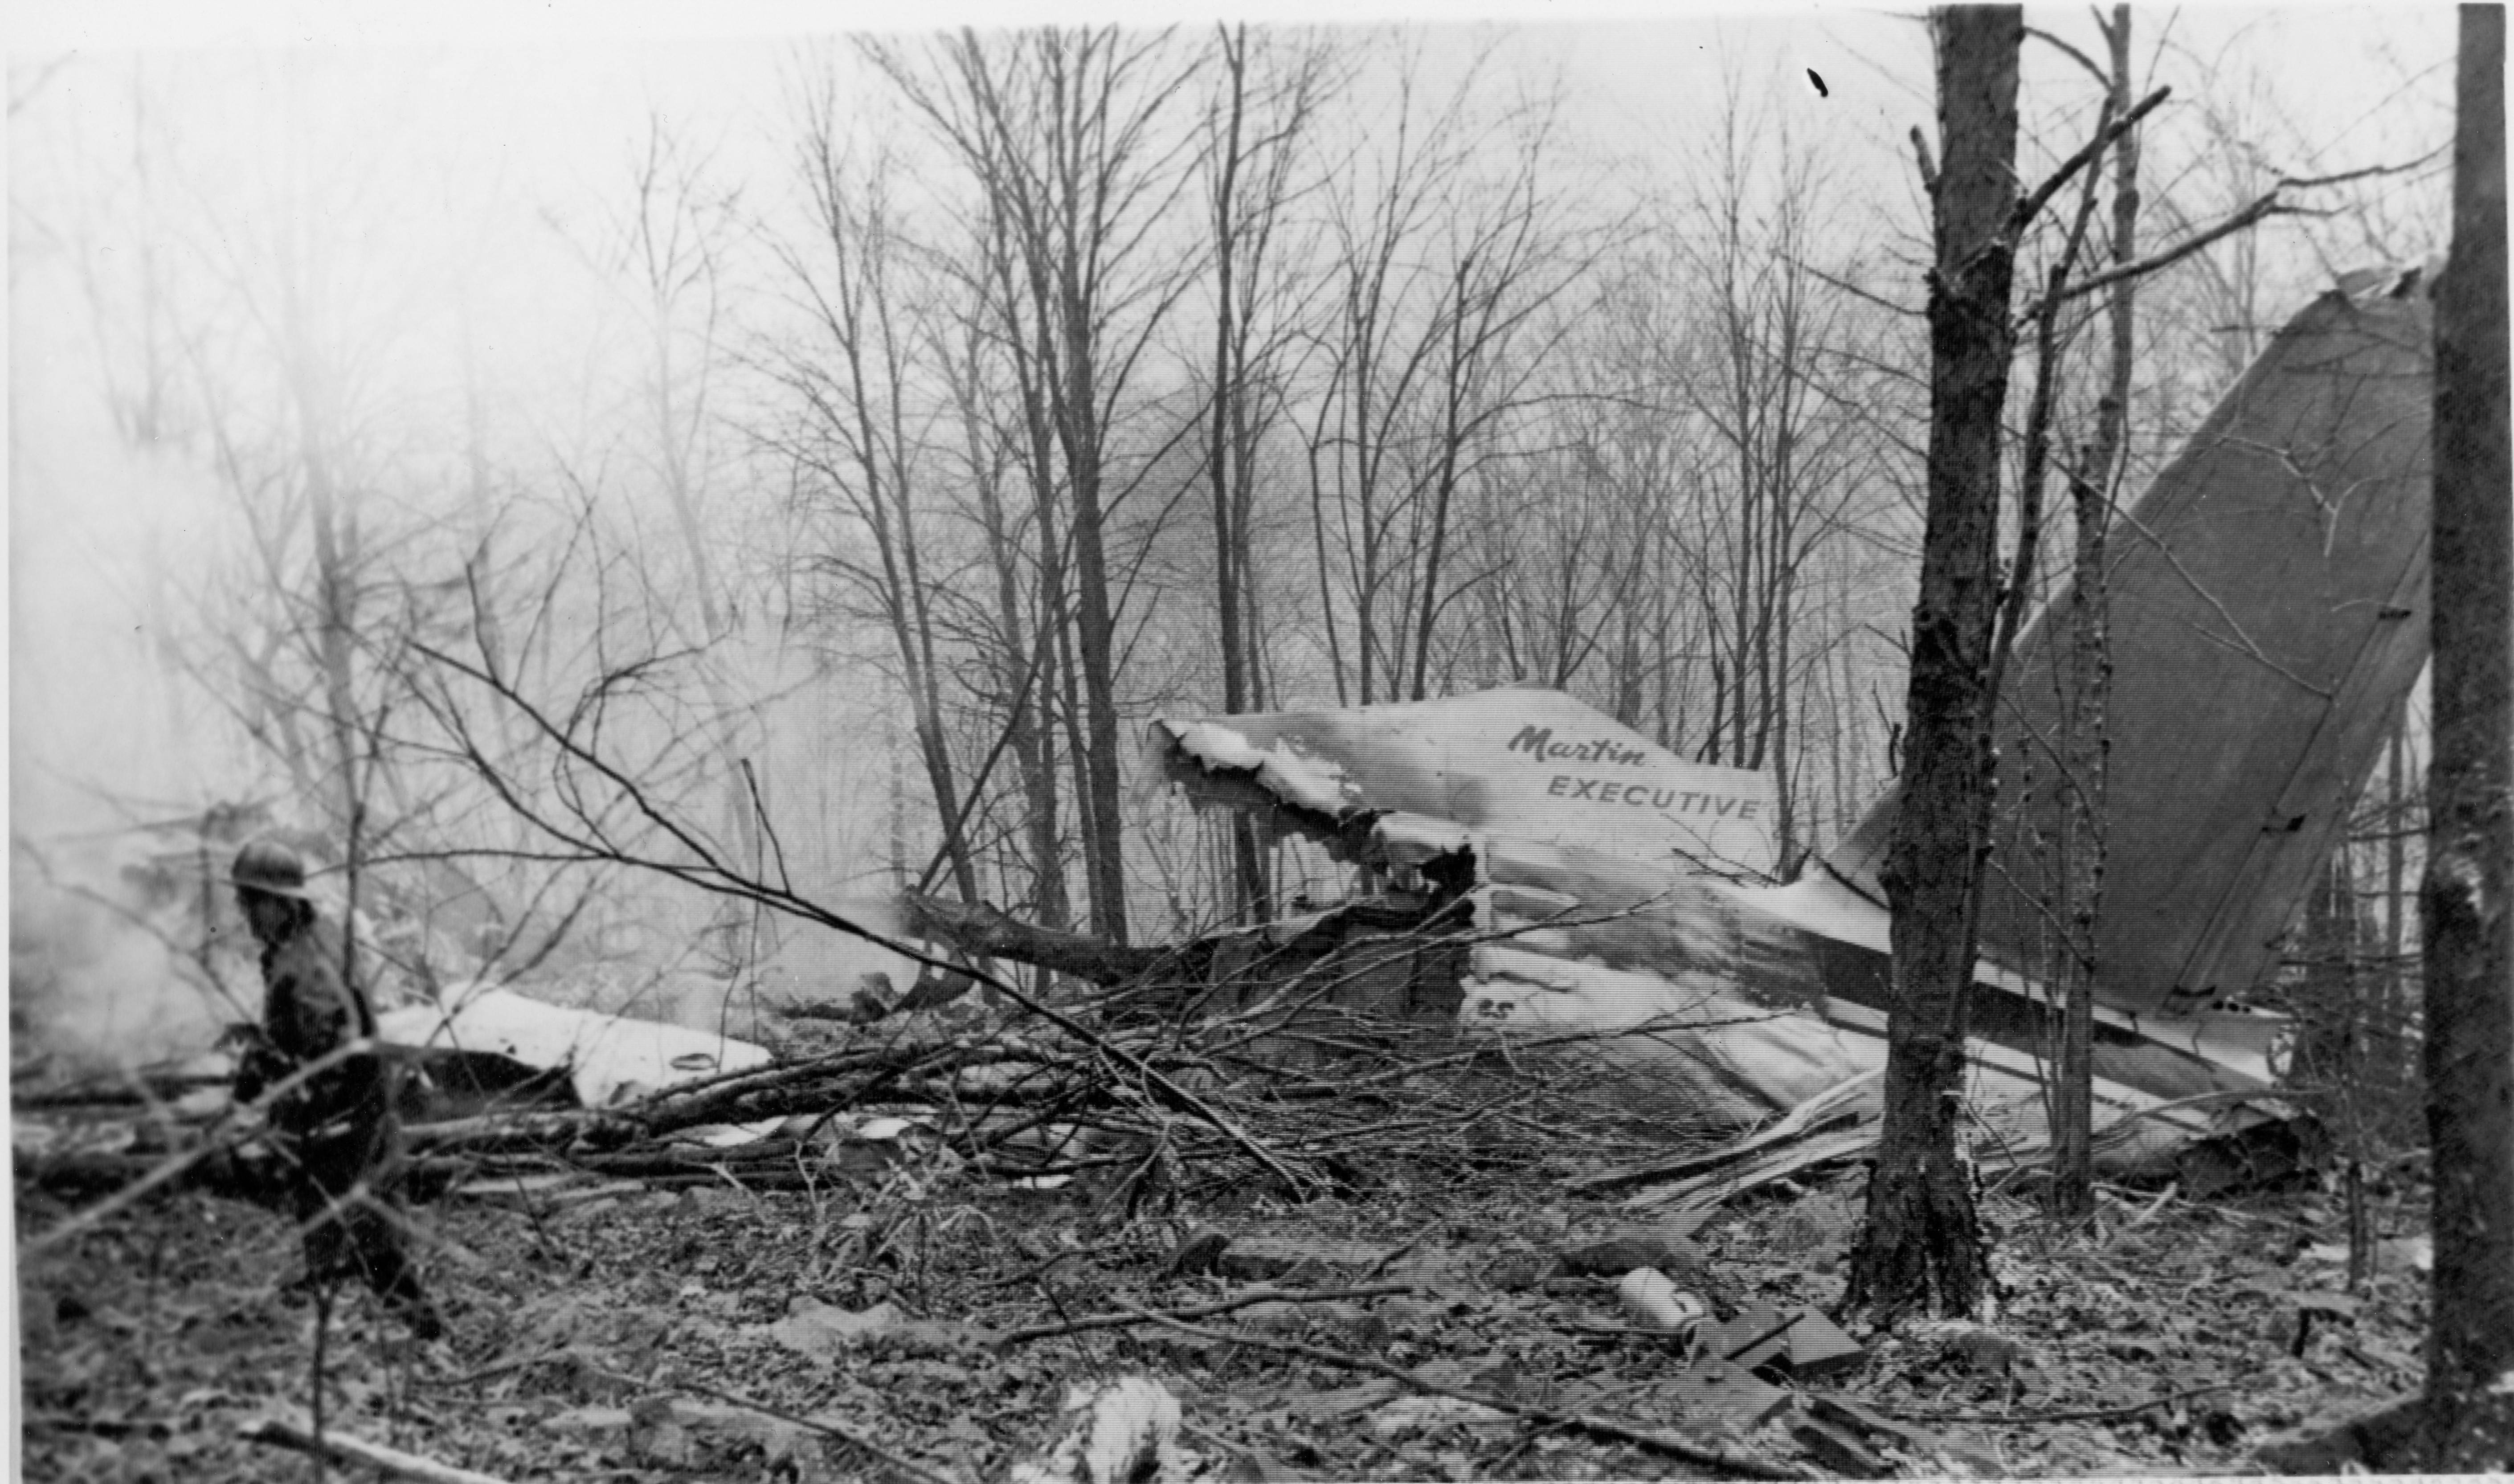 Smoldering tail section. Photo courtesy of the Williamsport Sun Gazette archive.